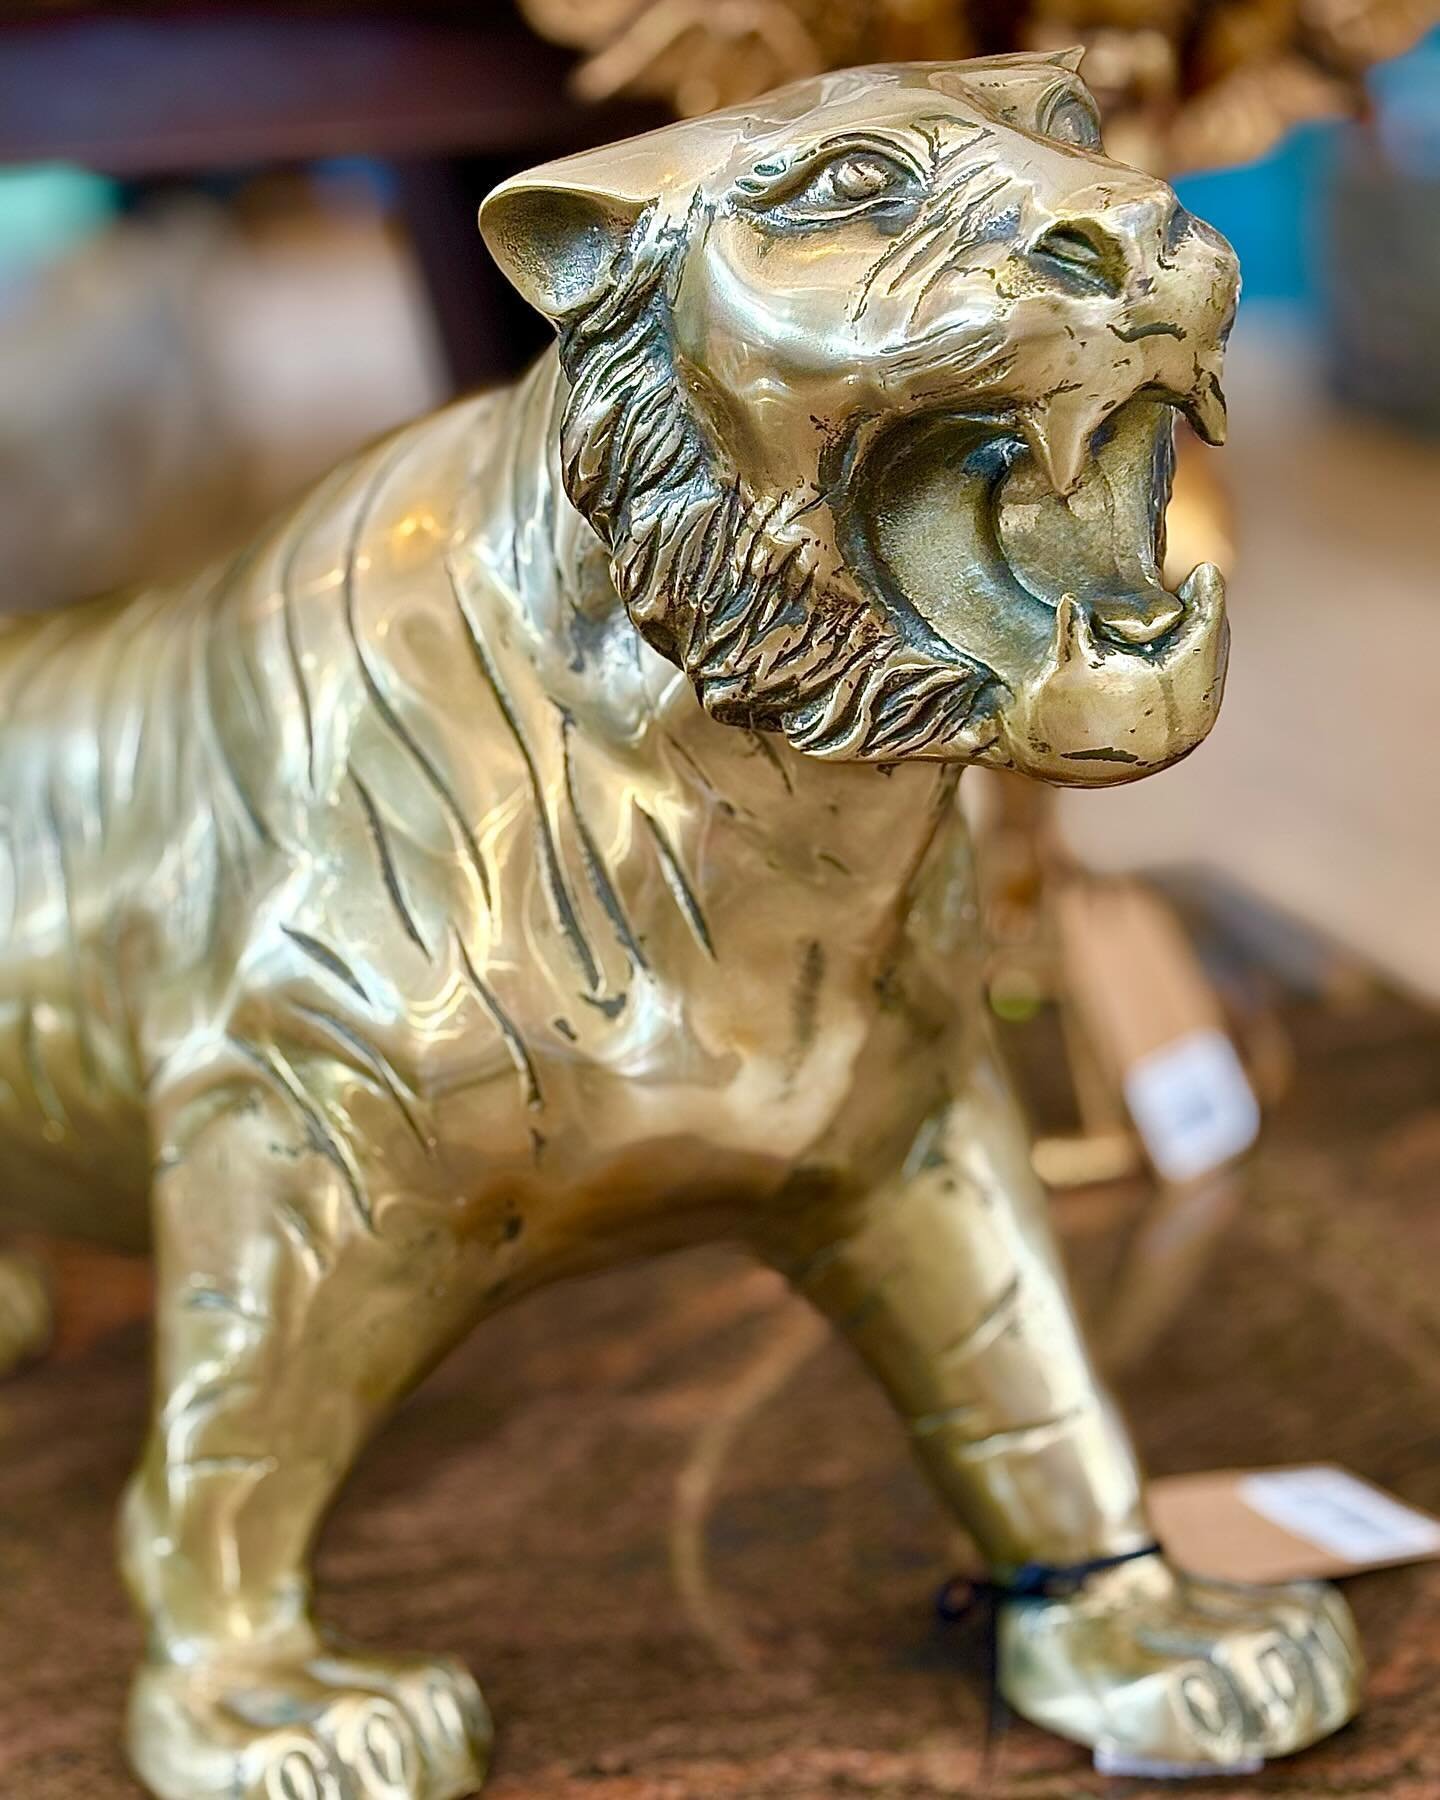 Introducing&hellip; our majestic prowling tiger! 

Help us give him a name as powerful as he is 🐅👑

Share your suggestions below!

#ProwlingTiger #SupportSmallBusiness #ShopSmall #SupportSmall #CescaFinds #NameTheTiger #LoveWestbourne #MajesticTige